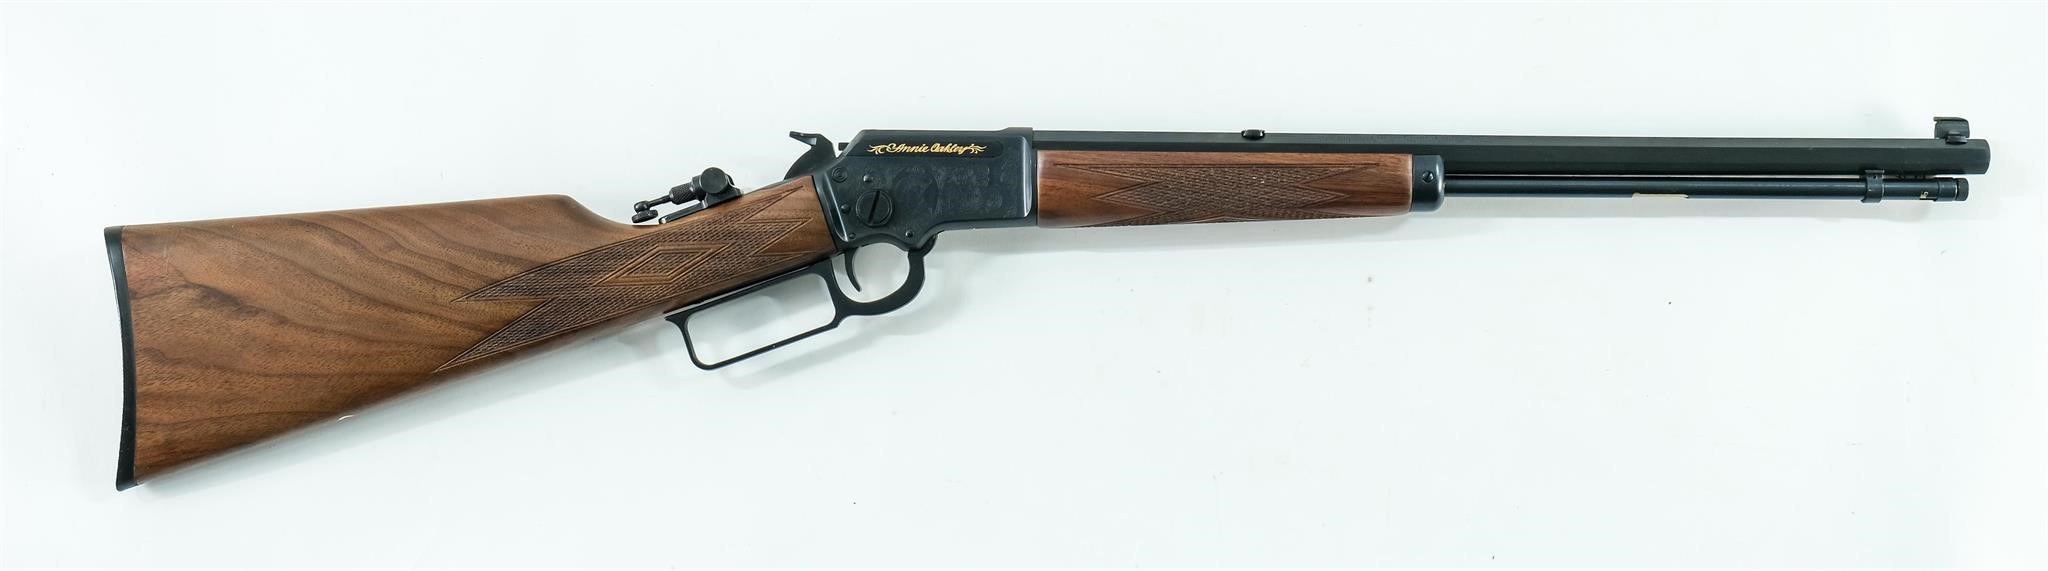 Marlin Model 1897 Annie Oakley Rifle | Nest Egg Auctions .